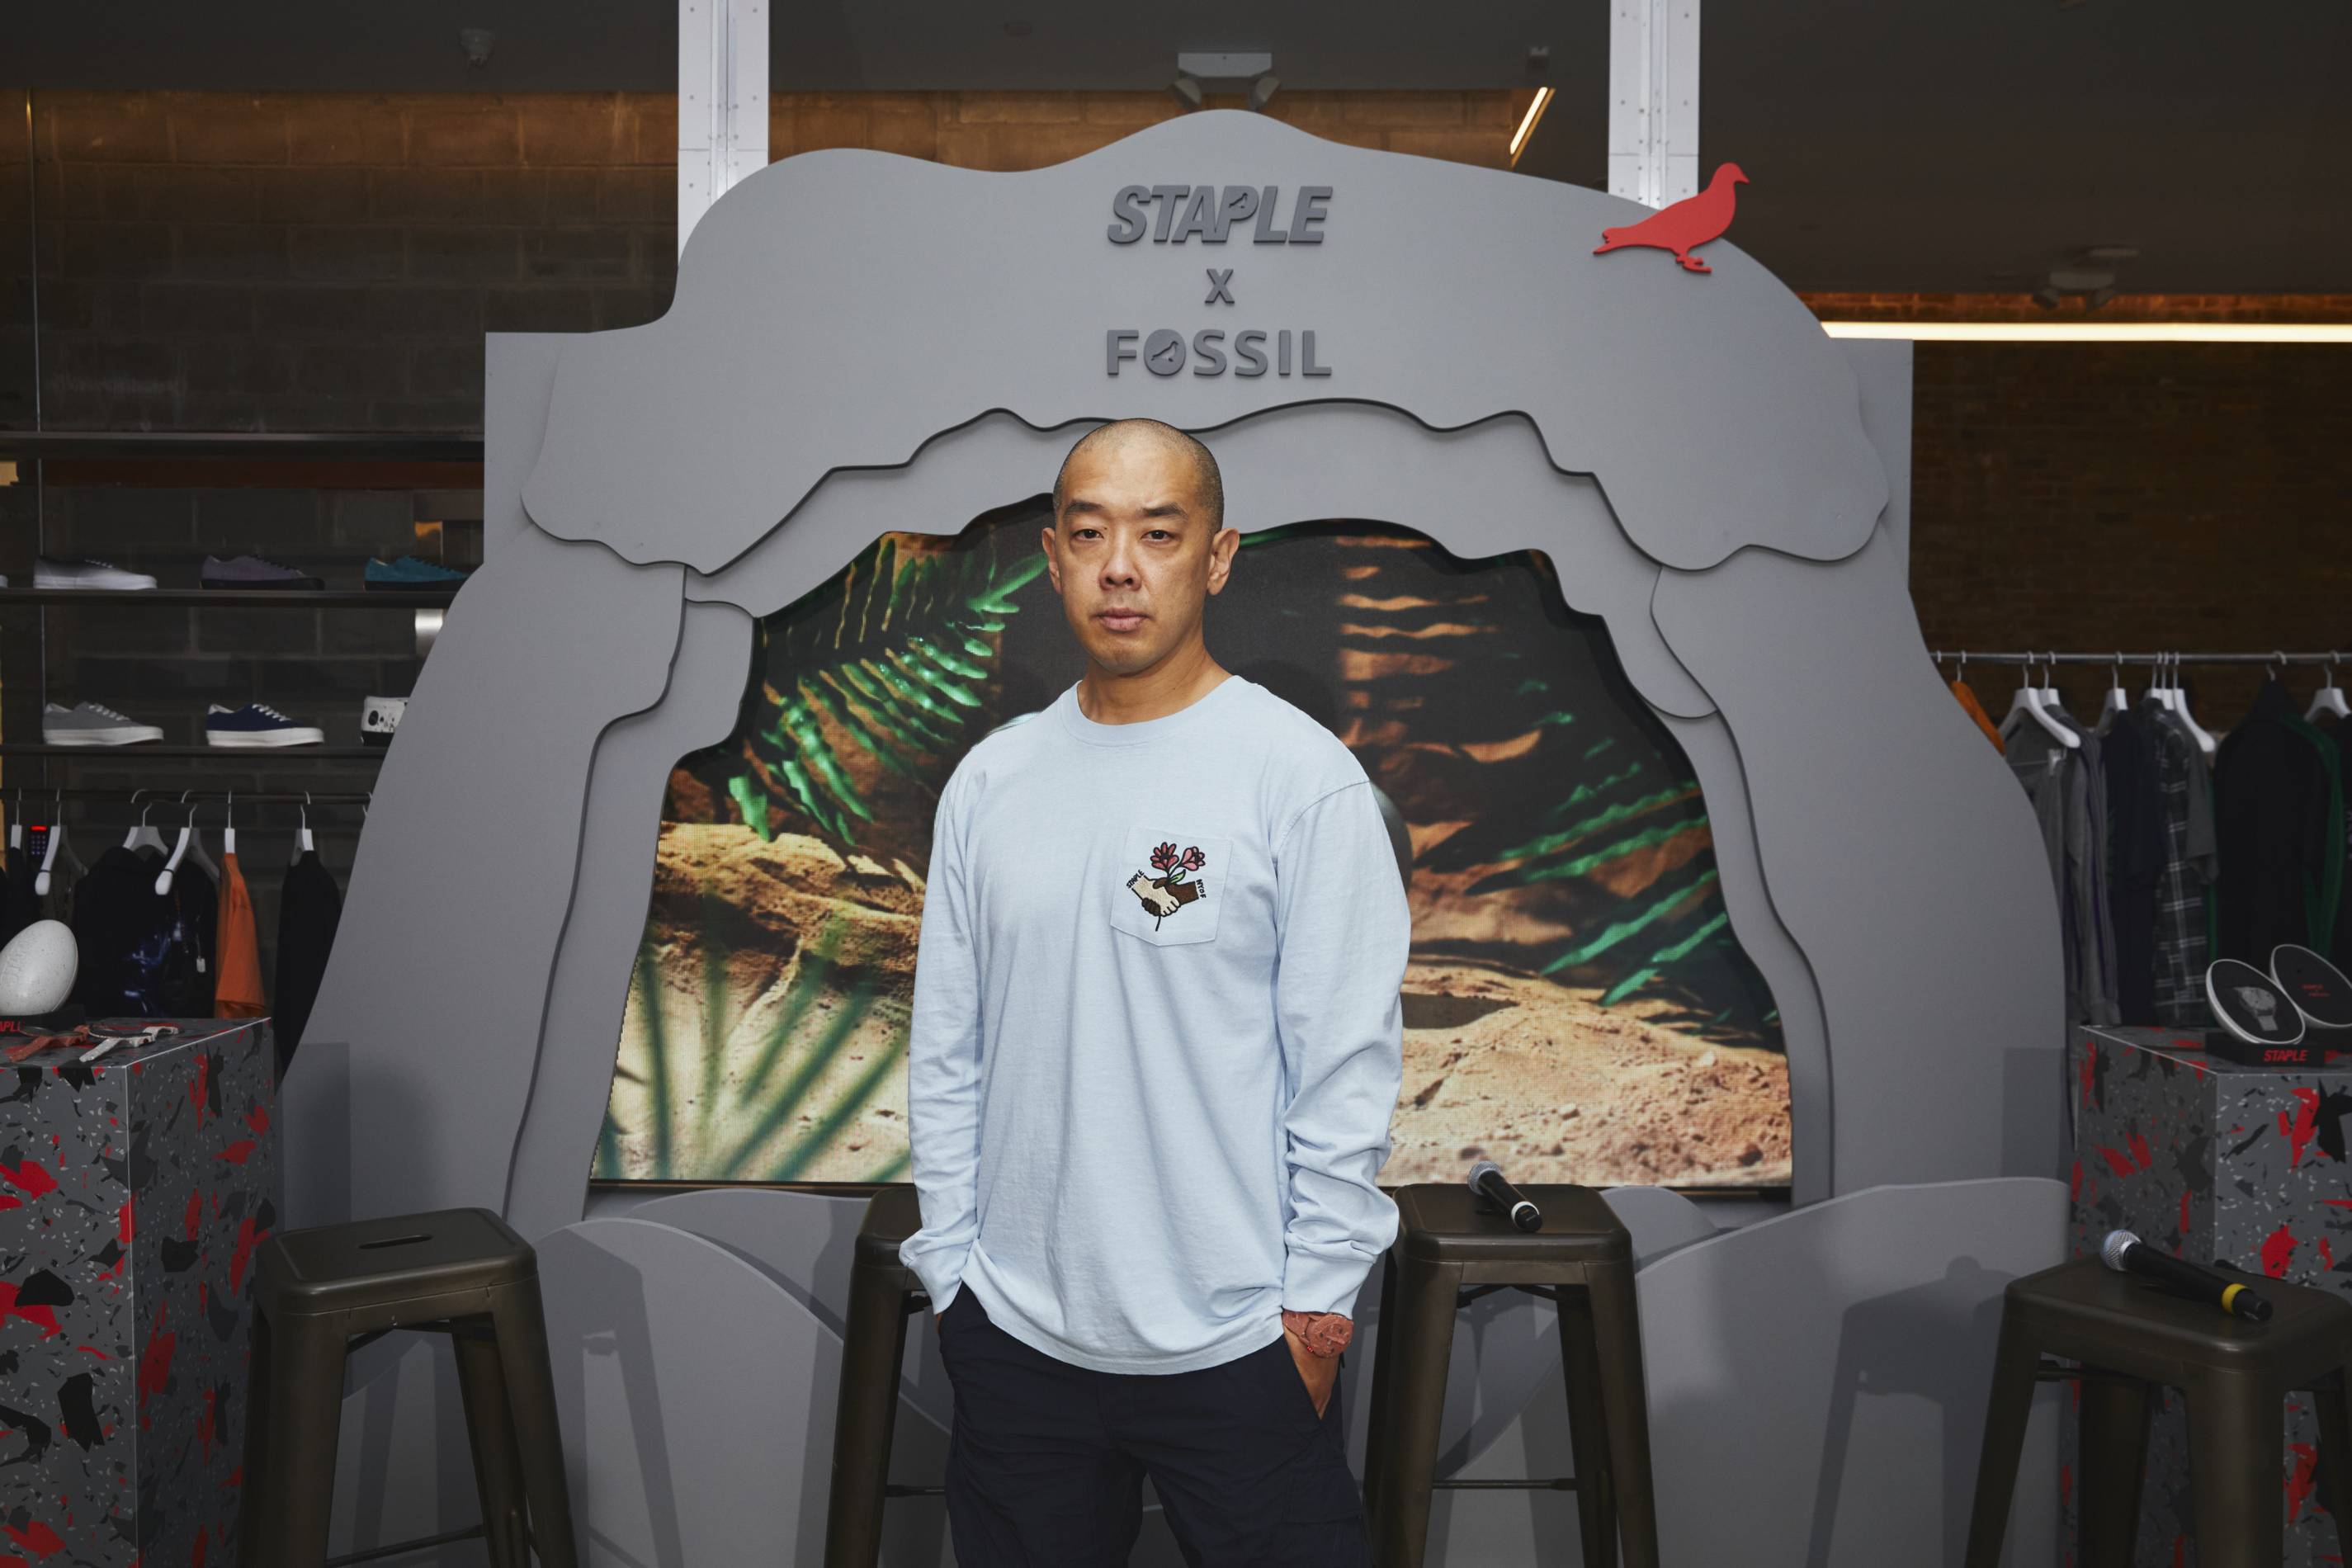 jeff staple at his fossil timepiece launch event in nyc